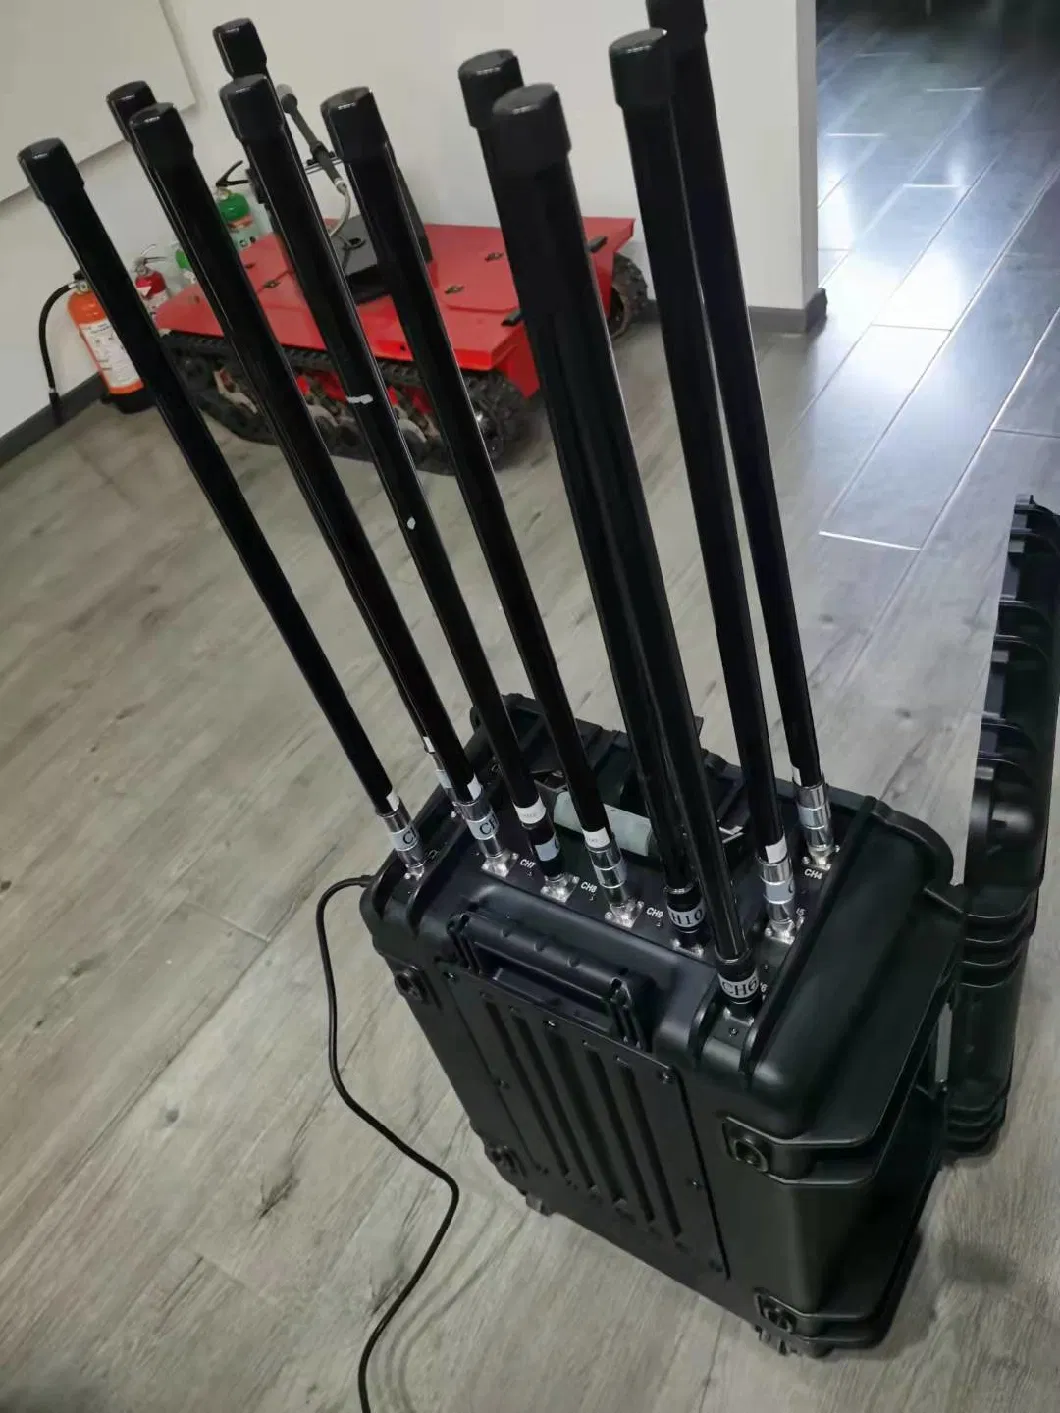 Portable Signal Jammer Full Bands, Full Frequencies Customized, Anti Drone Jammer